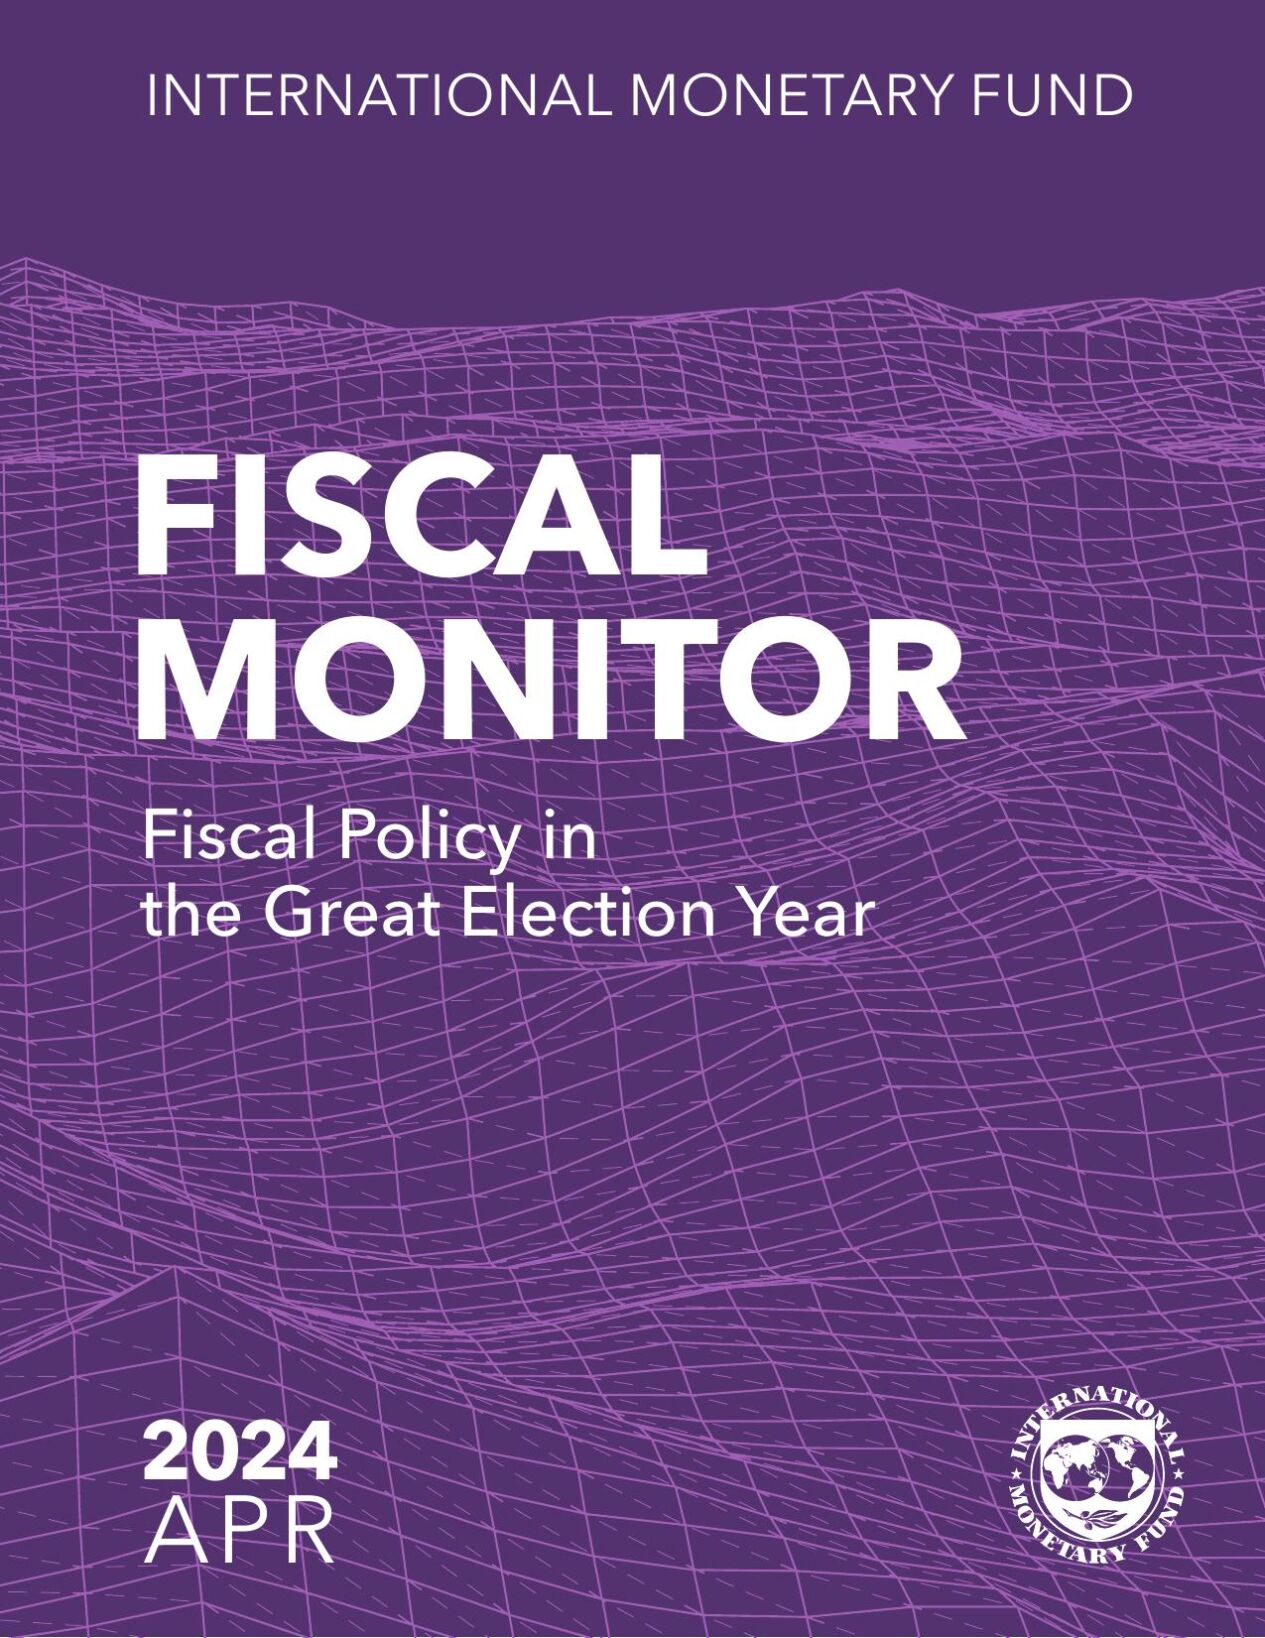 FISCAL MONITOR Fiscal Policy in the Great Election Year